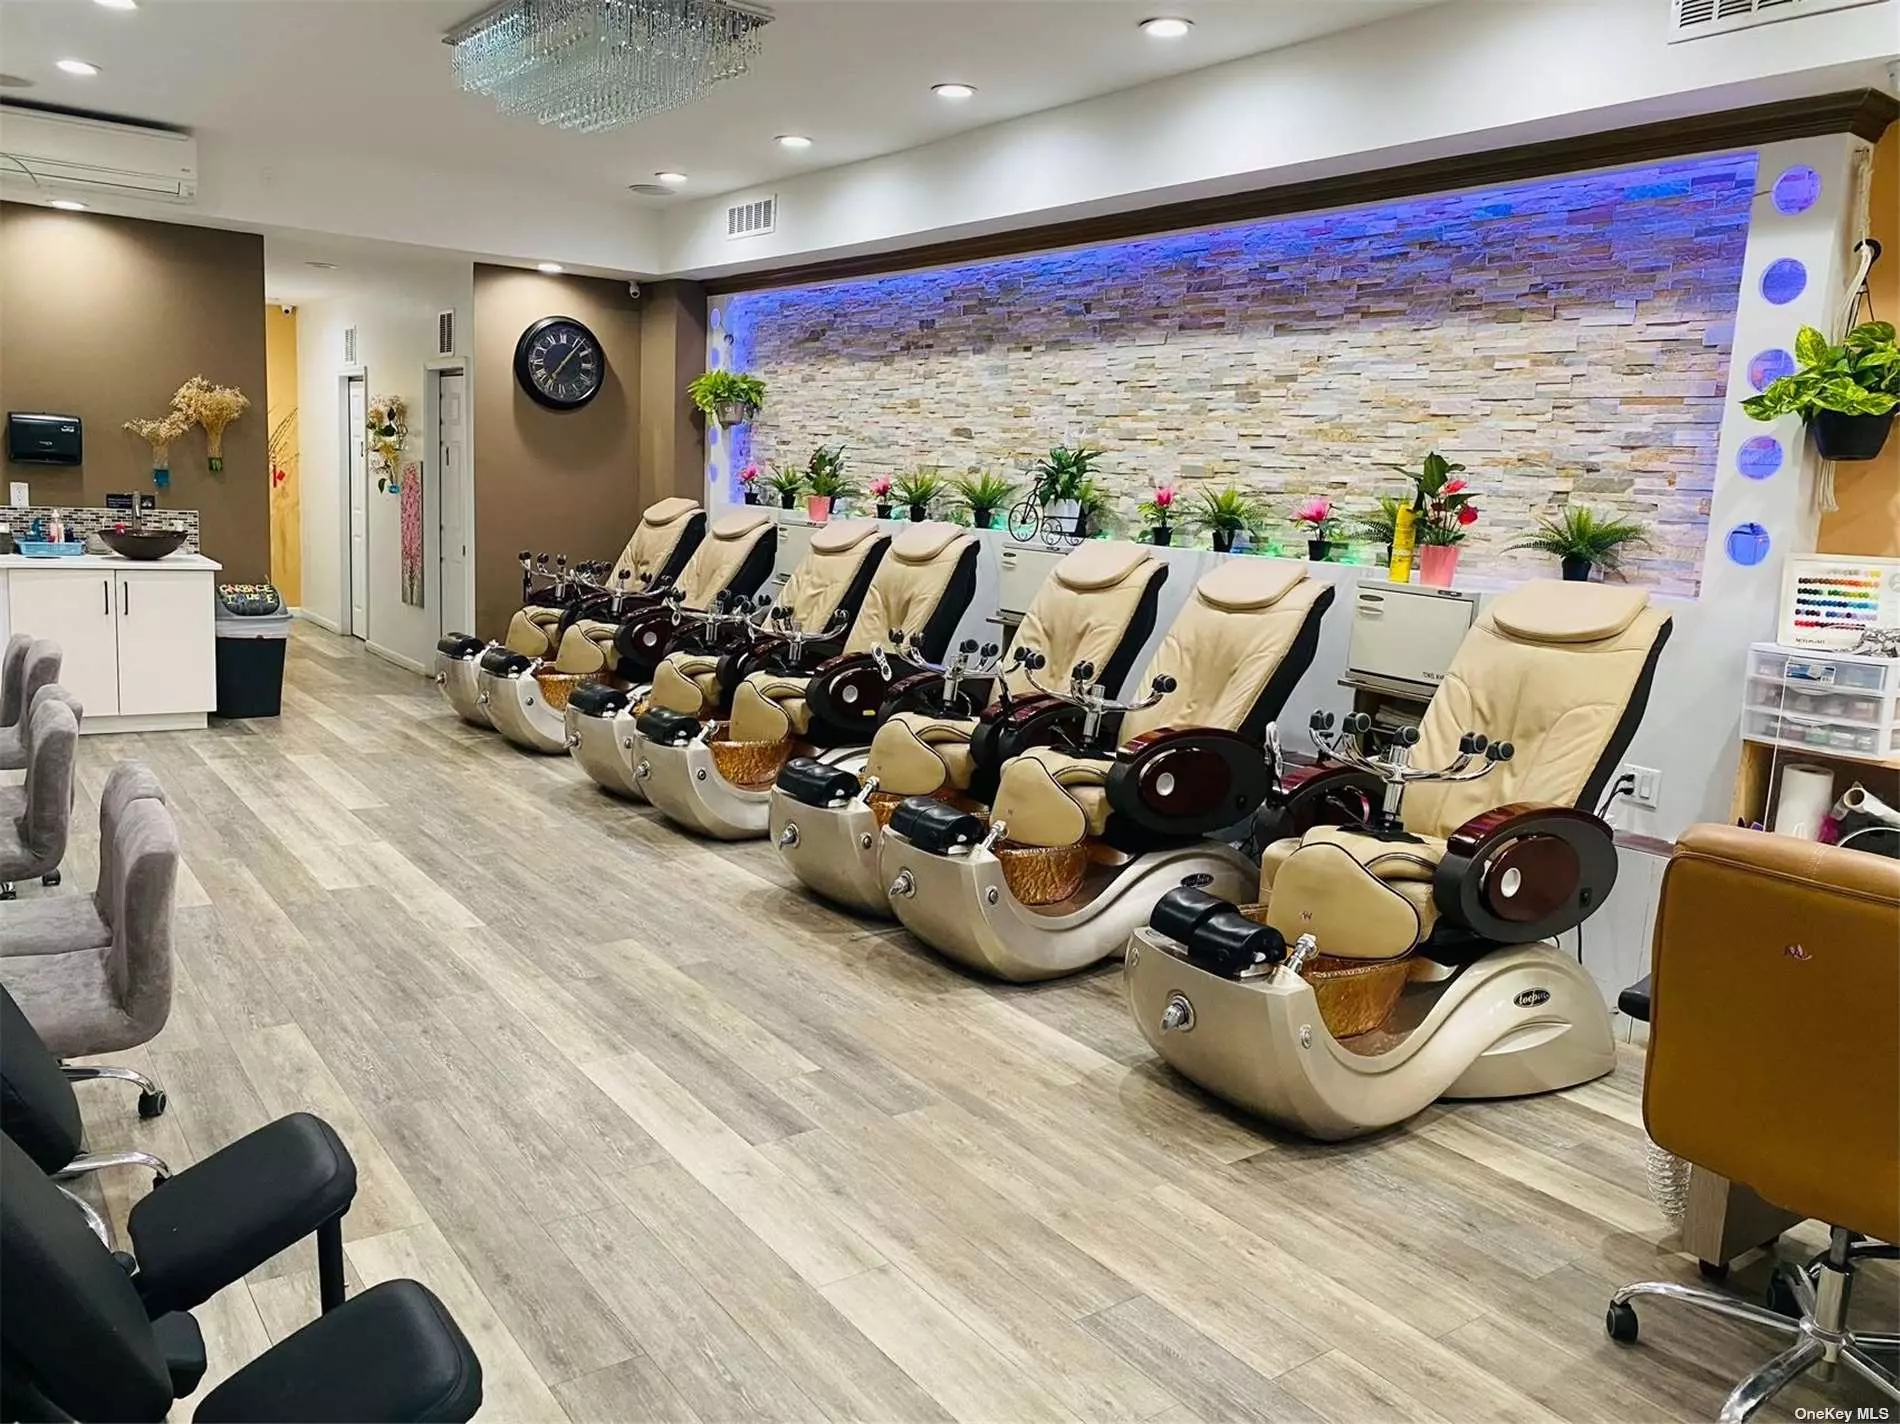 Great Neck Turnkey Nail Spa Business. Approx. 1, 300 SF main floor plus 1, 300 SF basement. 8 manicure stations, 7 JA pedicure chairs, 6 full time staffs, split unit ac, ventilation system. Steady cash and credit business. Current rent $5, 600/m, 3% Up/Yr. RE tax included, will change to 75% if tax increases. 3-year lease w/negotiable option for additional 5. Located on main commercial streets of Great Neck with shops, restaurants and L.I.R.R. station.